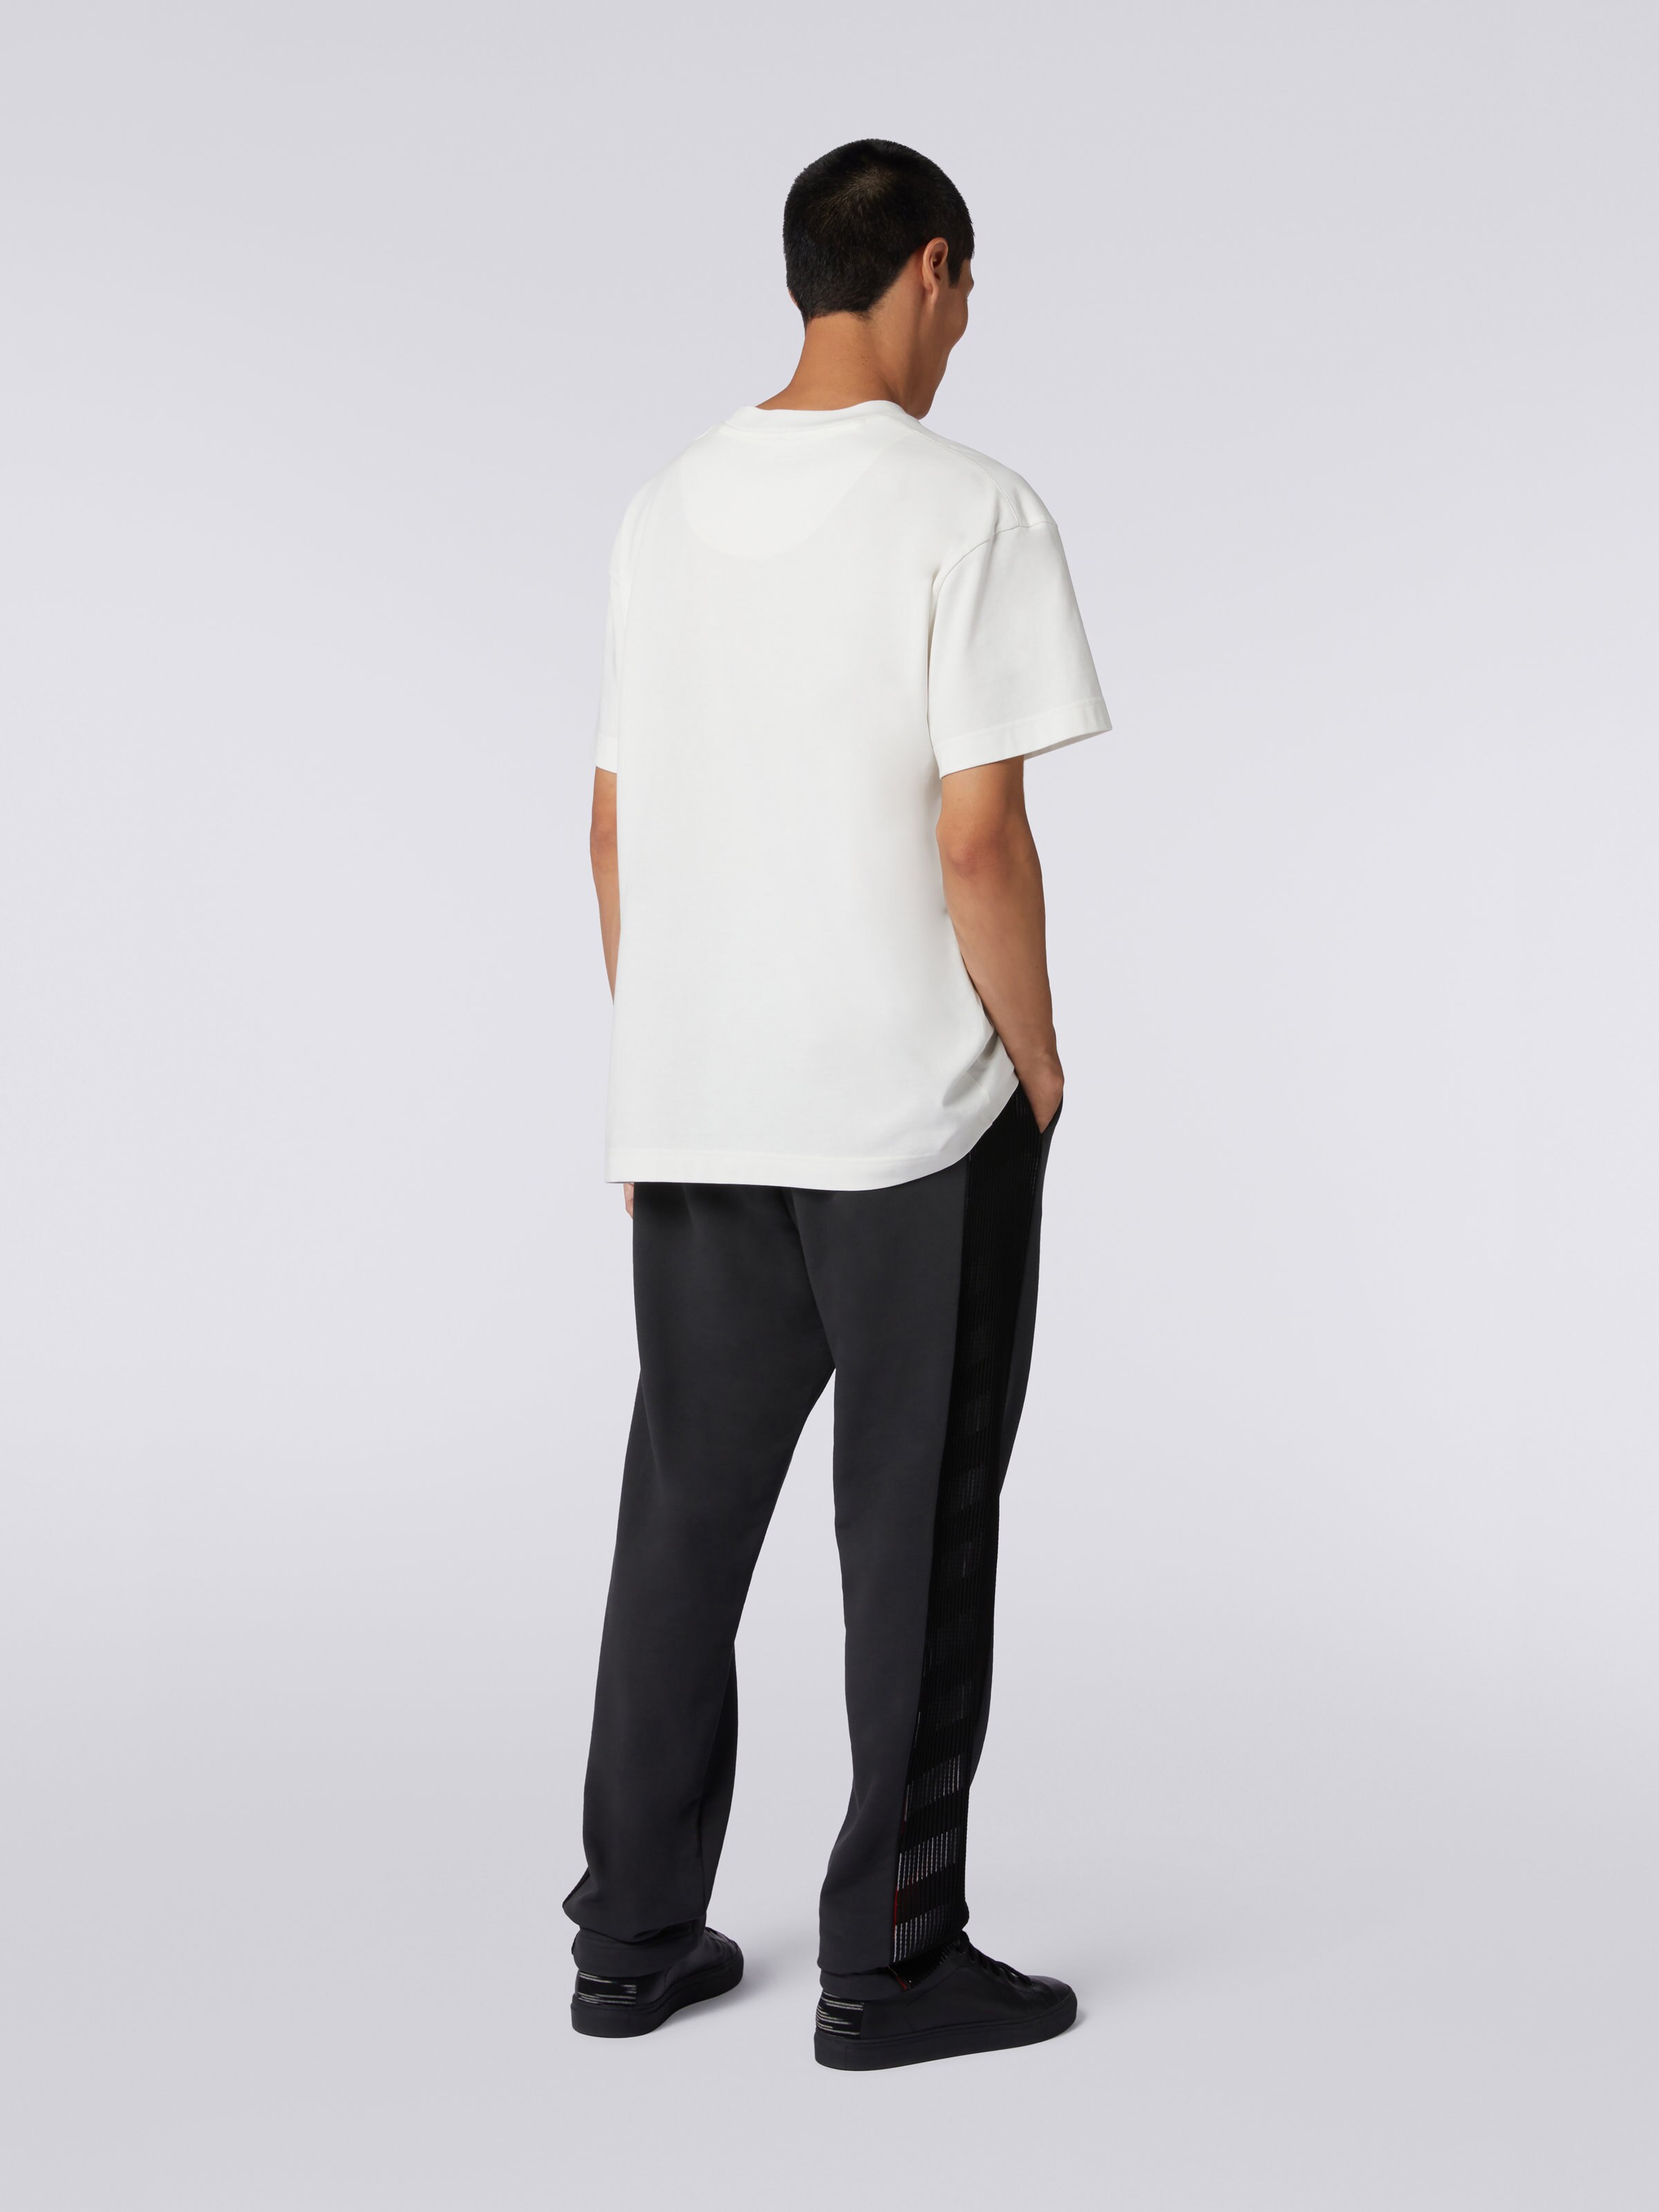 Cotton sports trousers with knitted insert in collaboration with Mike Maignan, Grey - 3